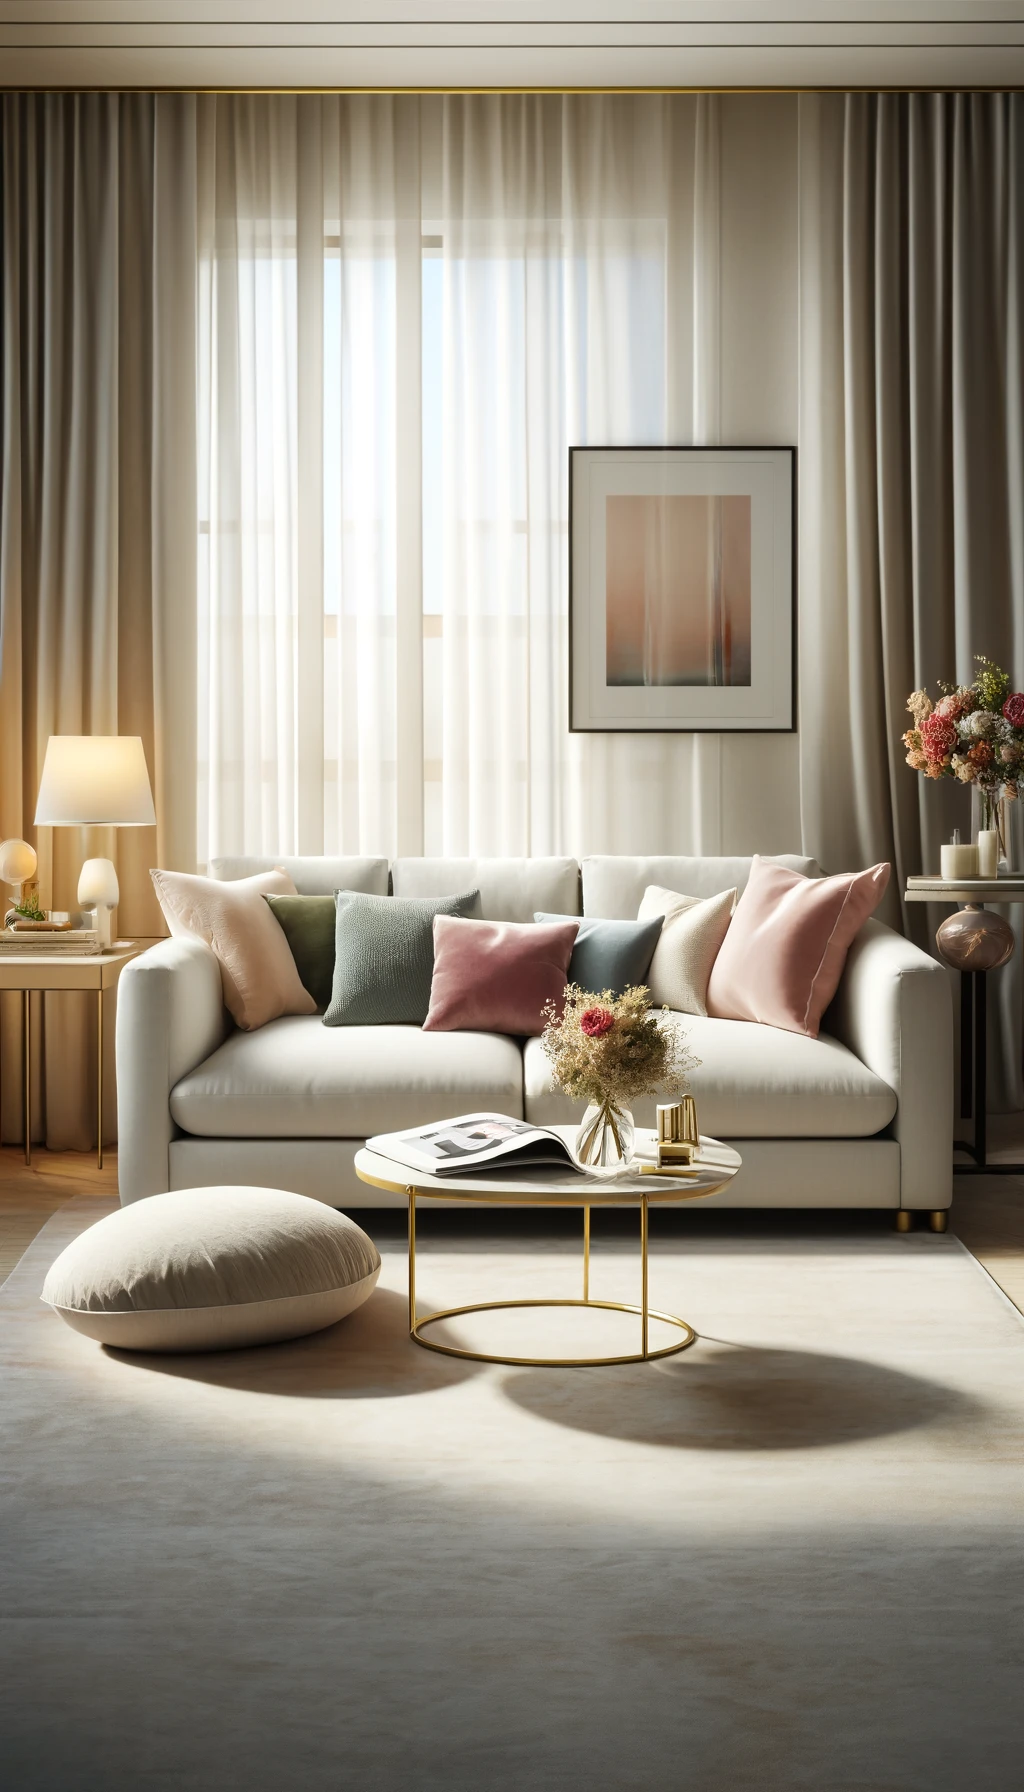 Elevate Your Home with a Chic Boucle Sofa - Discover Comfy Chic Today!